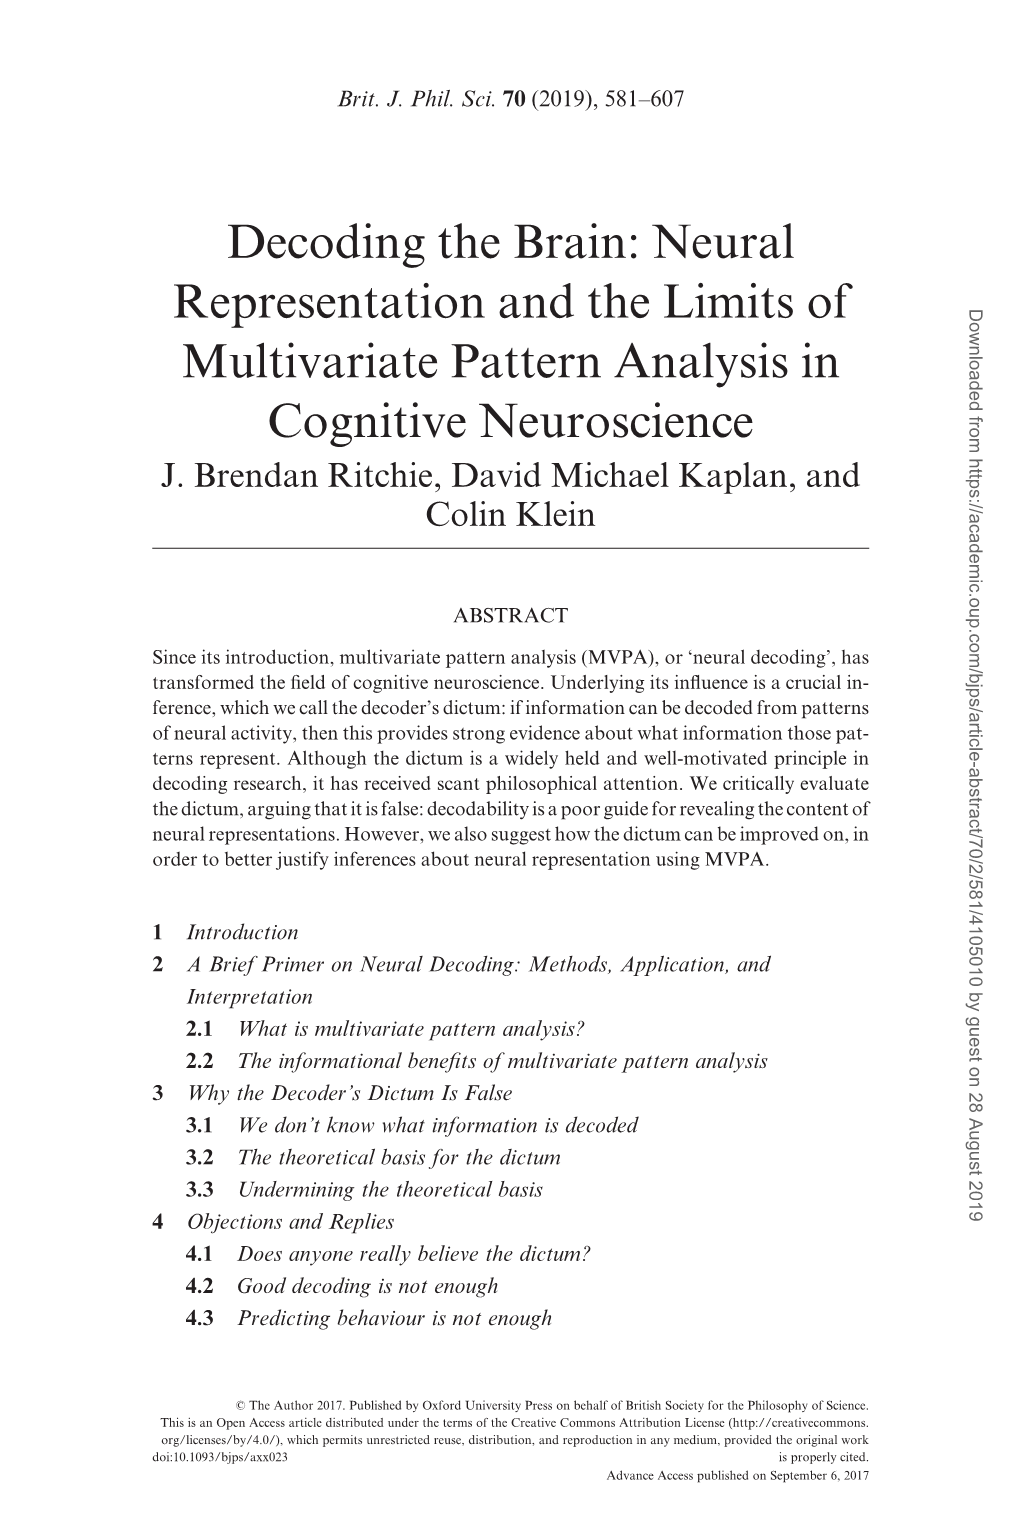 Neural Representation and the Limits of Multivariate Pattern Analysis In